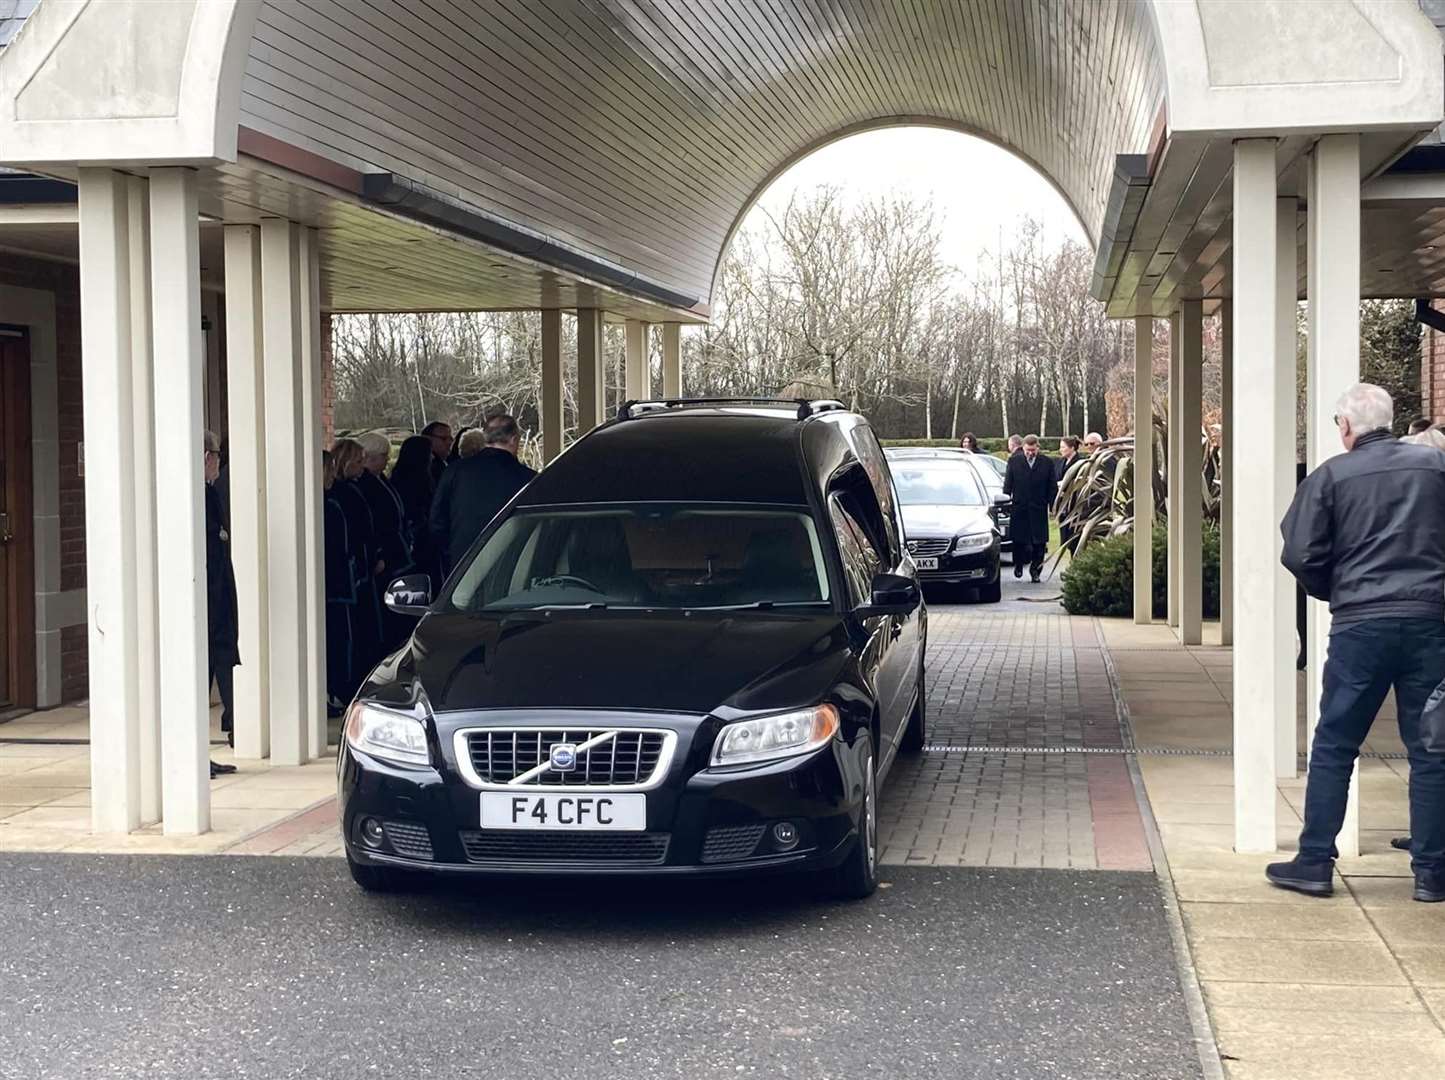 The funeral of Sheppey councillor Cameron Beart was held at the Garden of England Crematorium in Sittingbourne. Picture: John Nurden